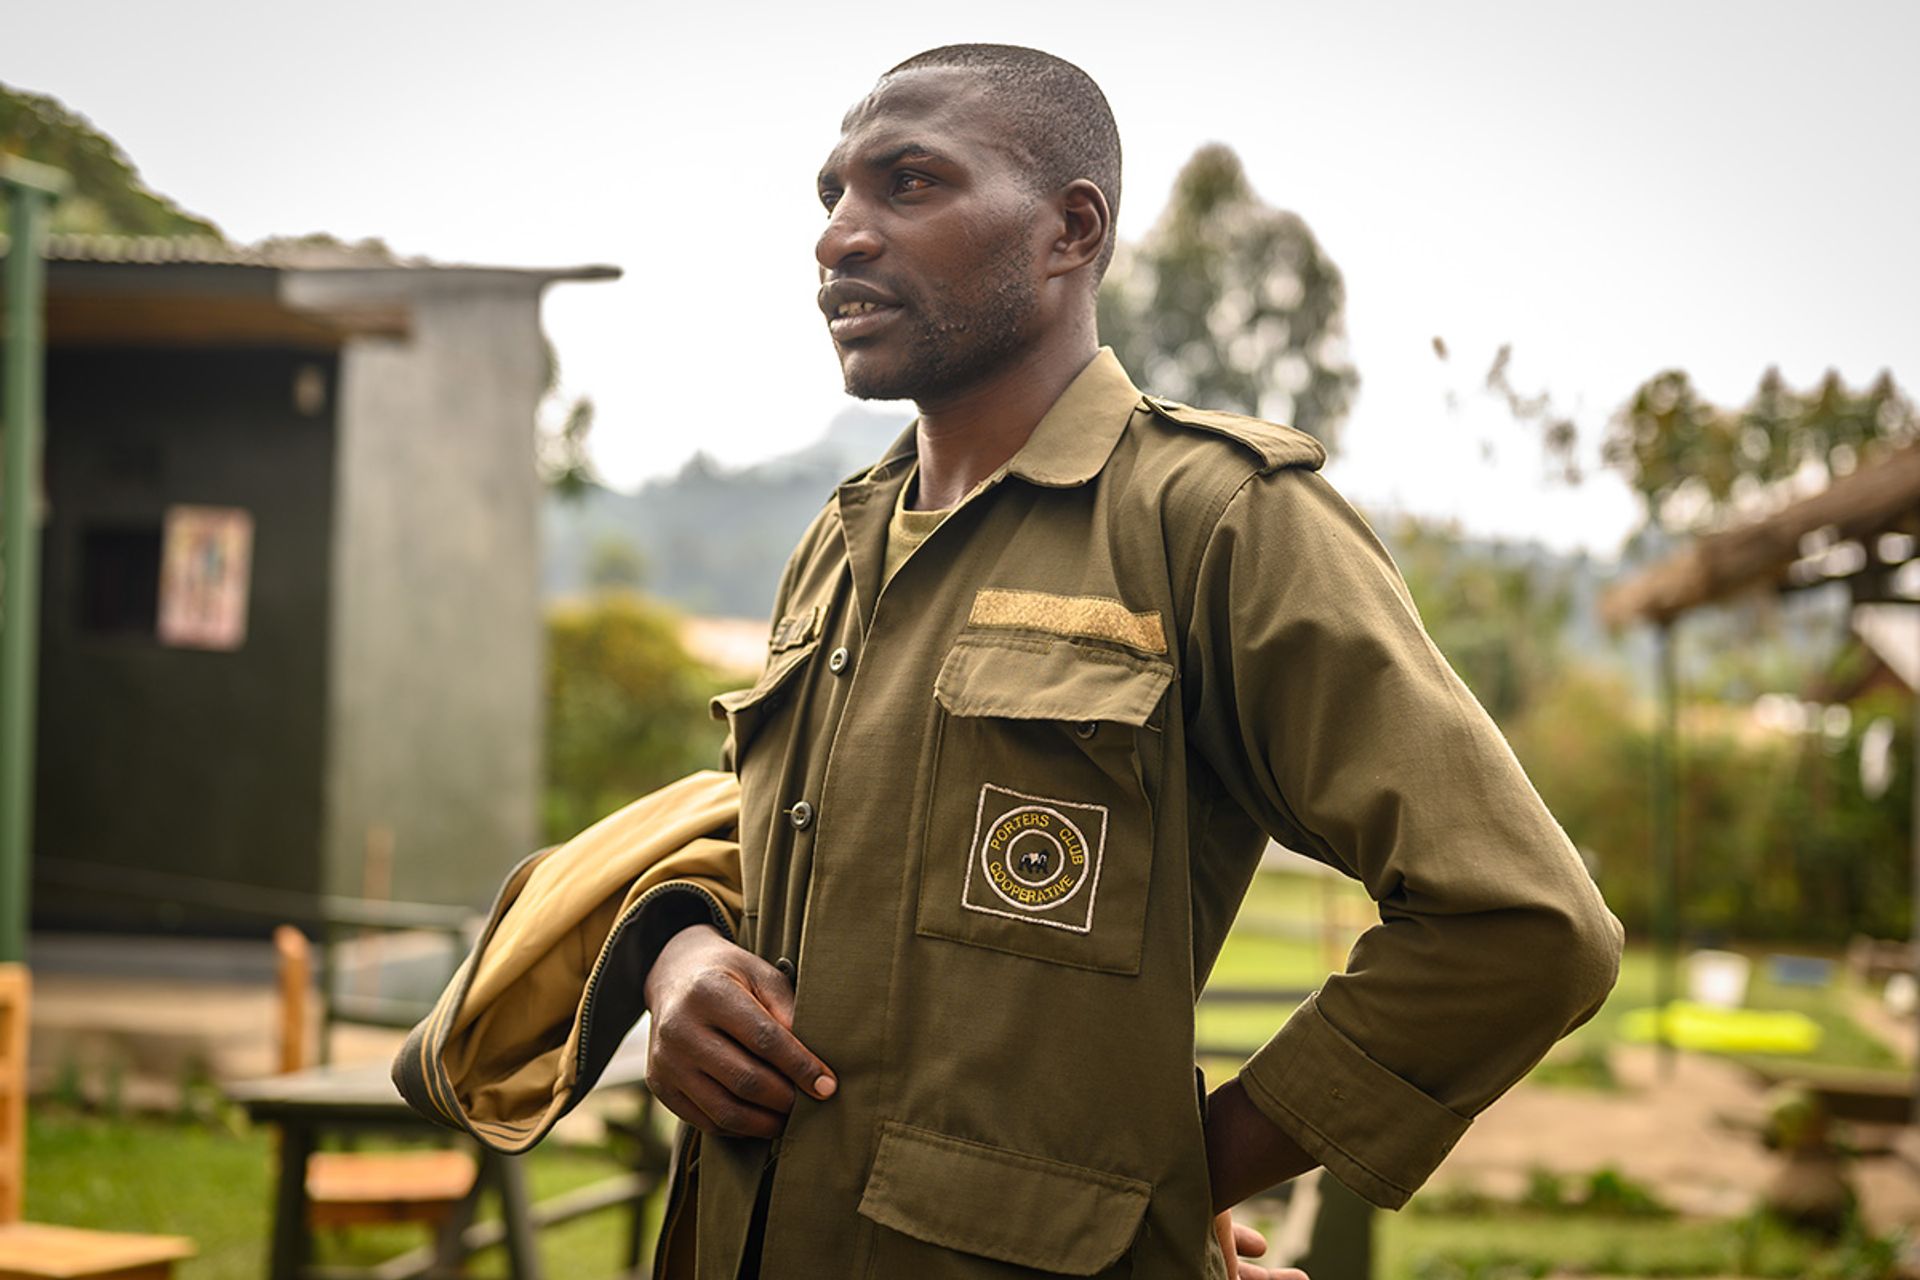 Former poacher Emmanuel Emmy, 38, has retired his weapons. He is now a mountain porter under the local Porters’ Club Cooperative.